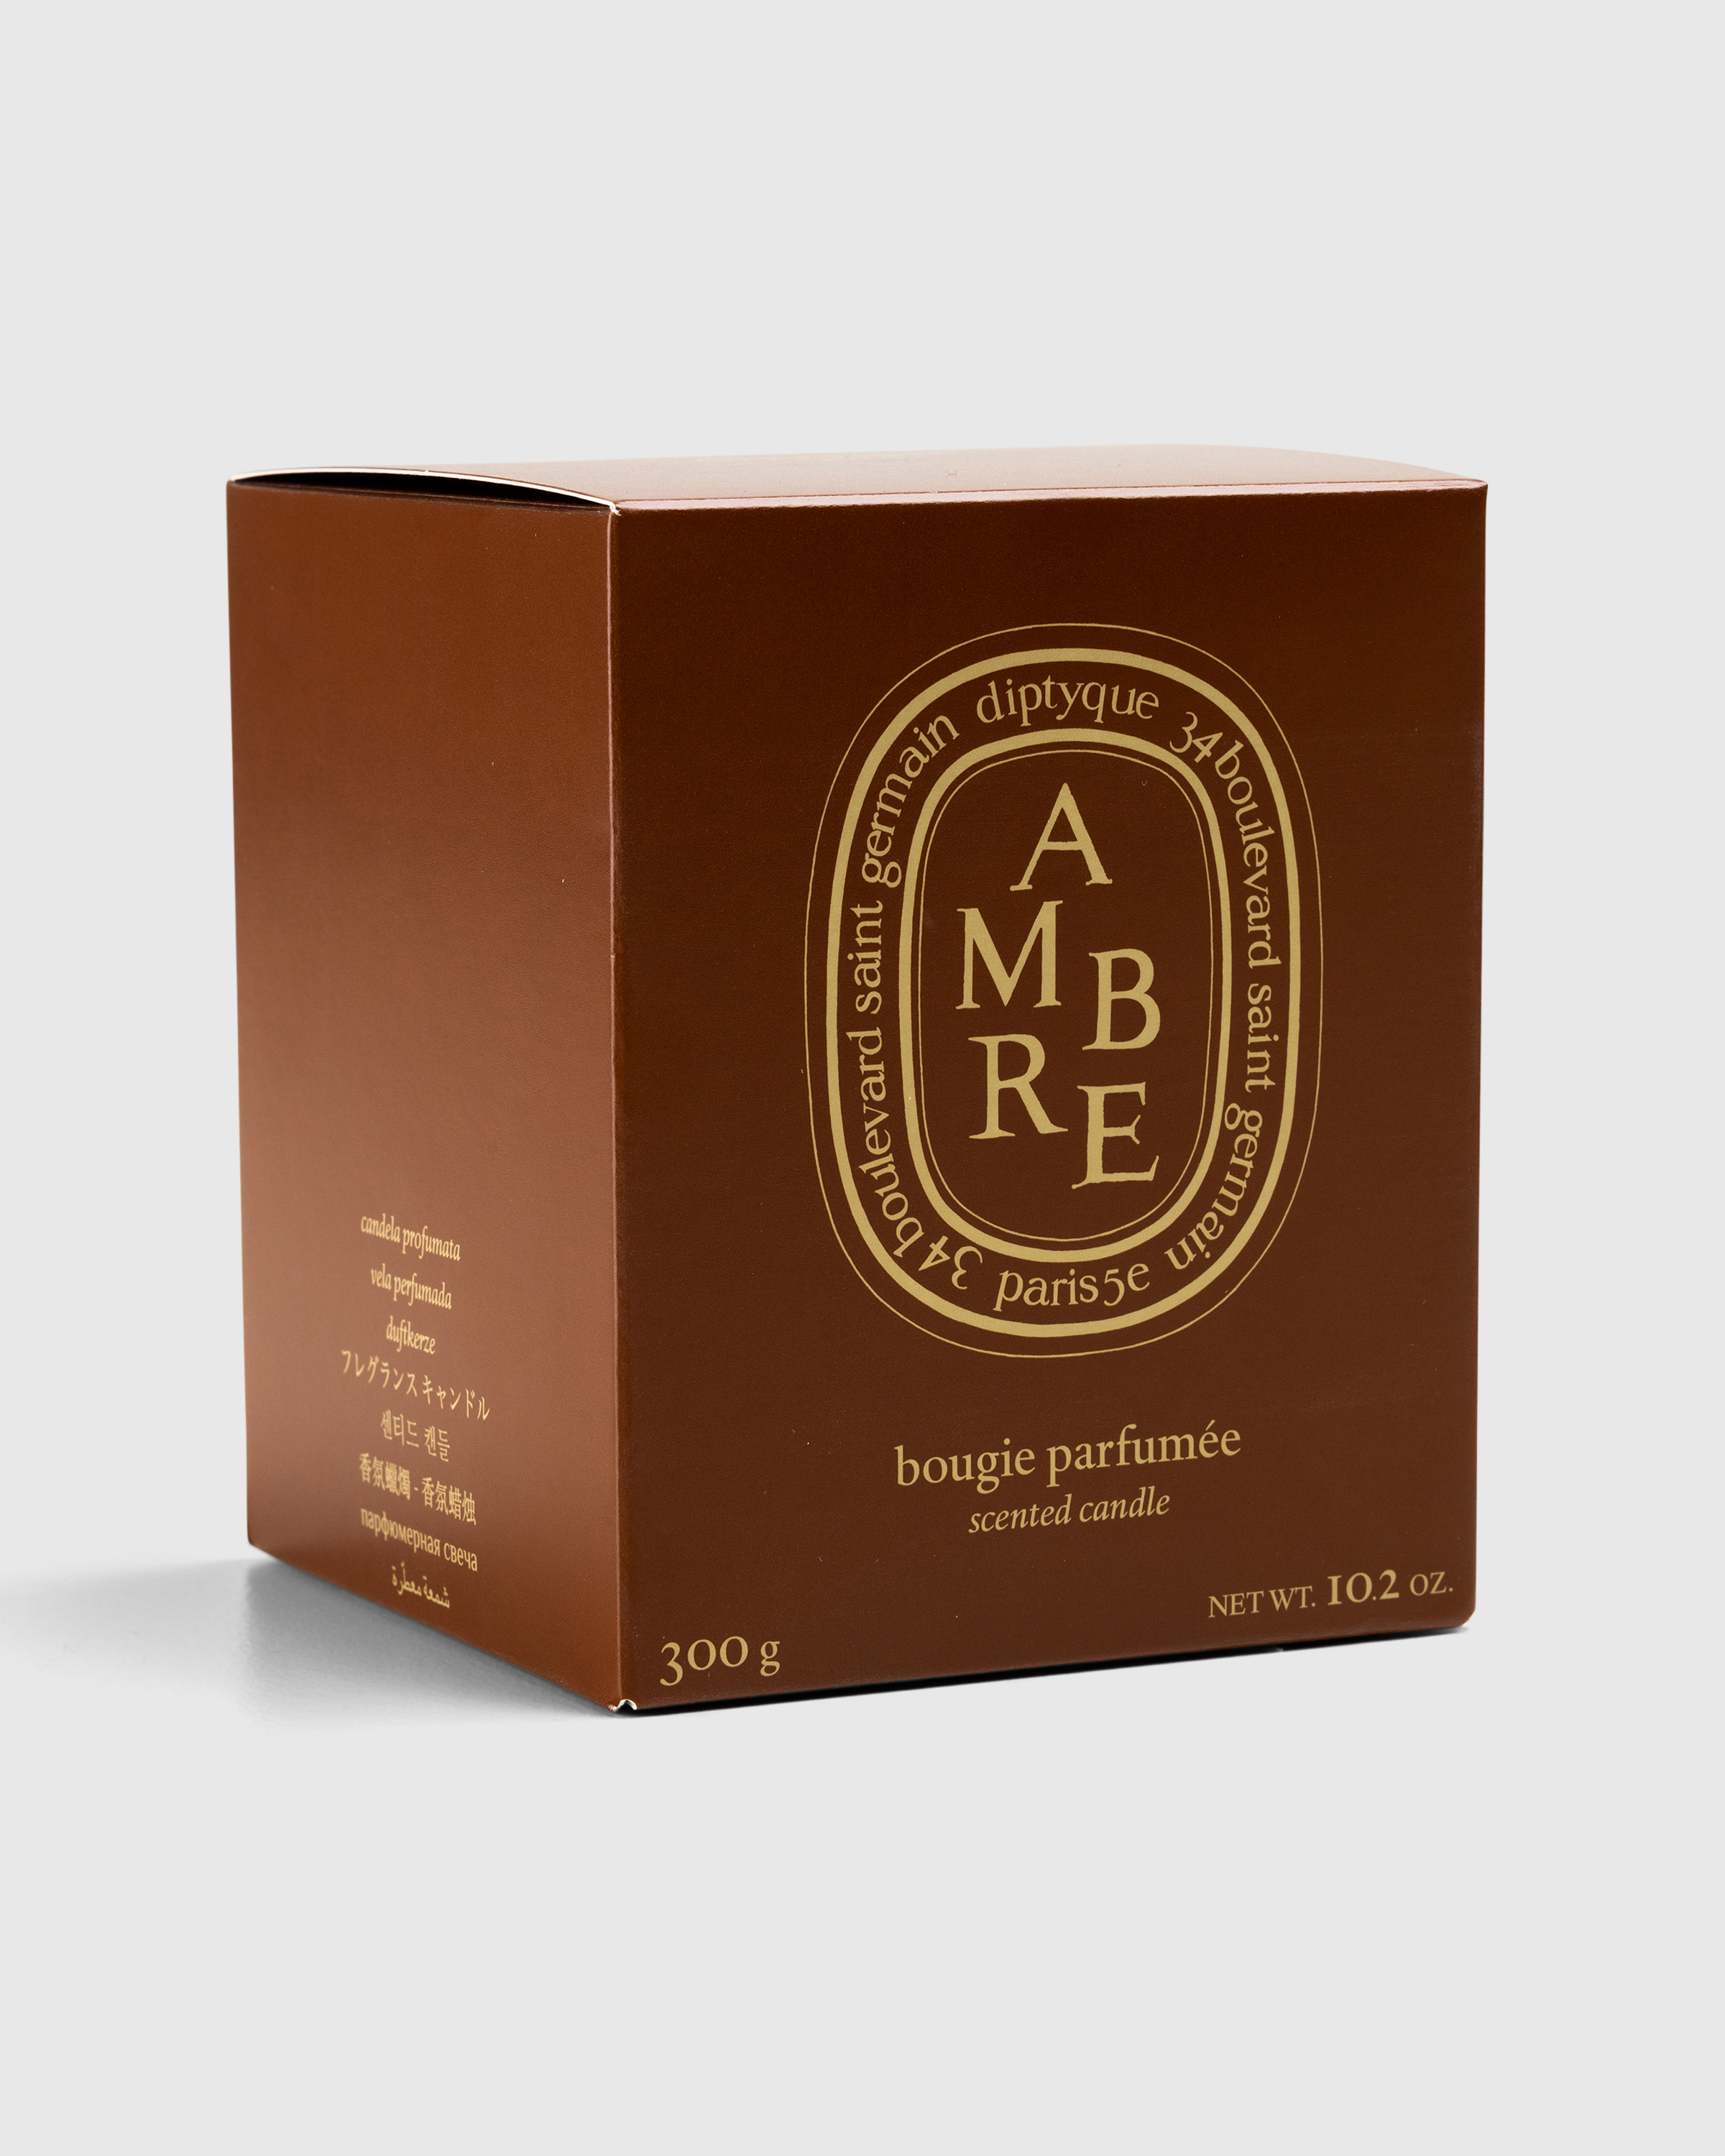 Diptyque – Amber Candle Ambre 300g - Candles & Fragrances - Brown - Image 3